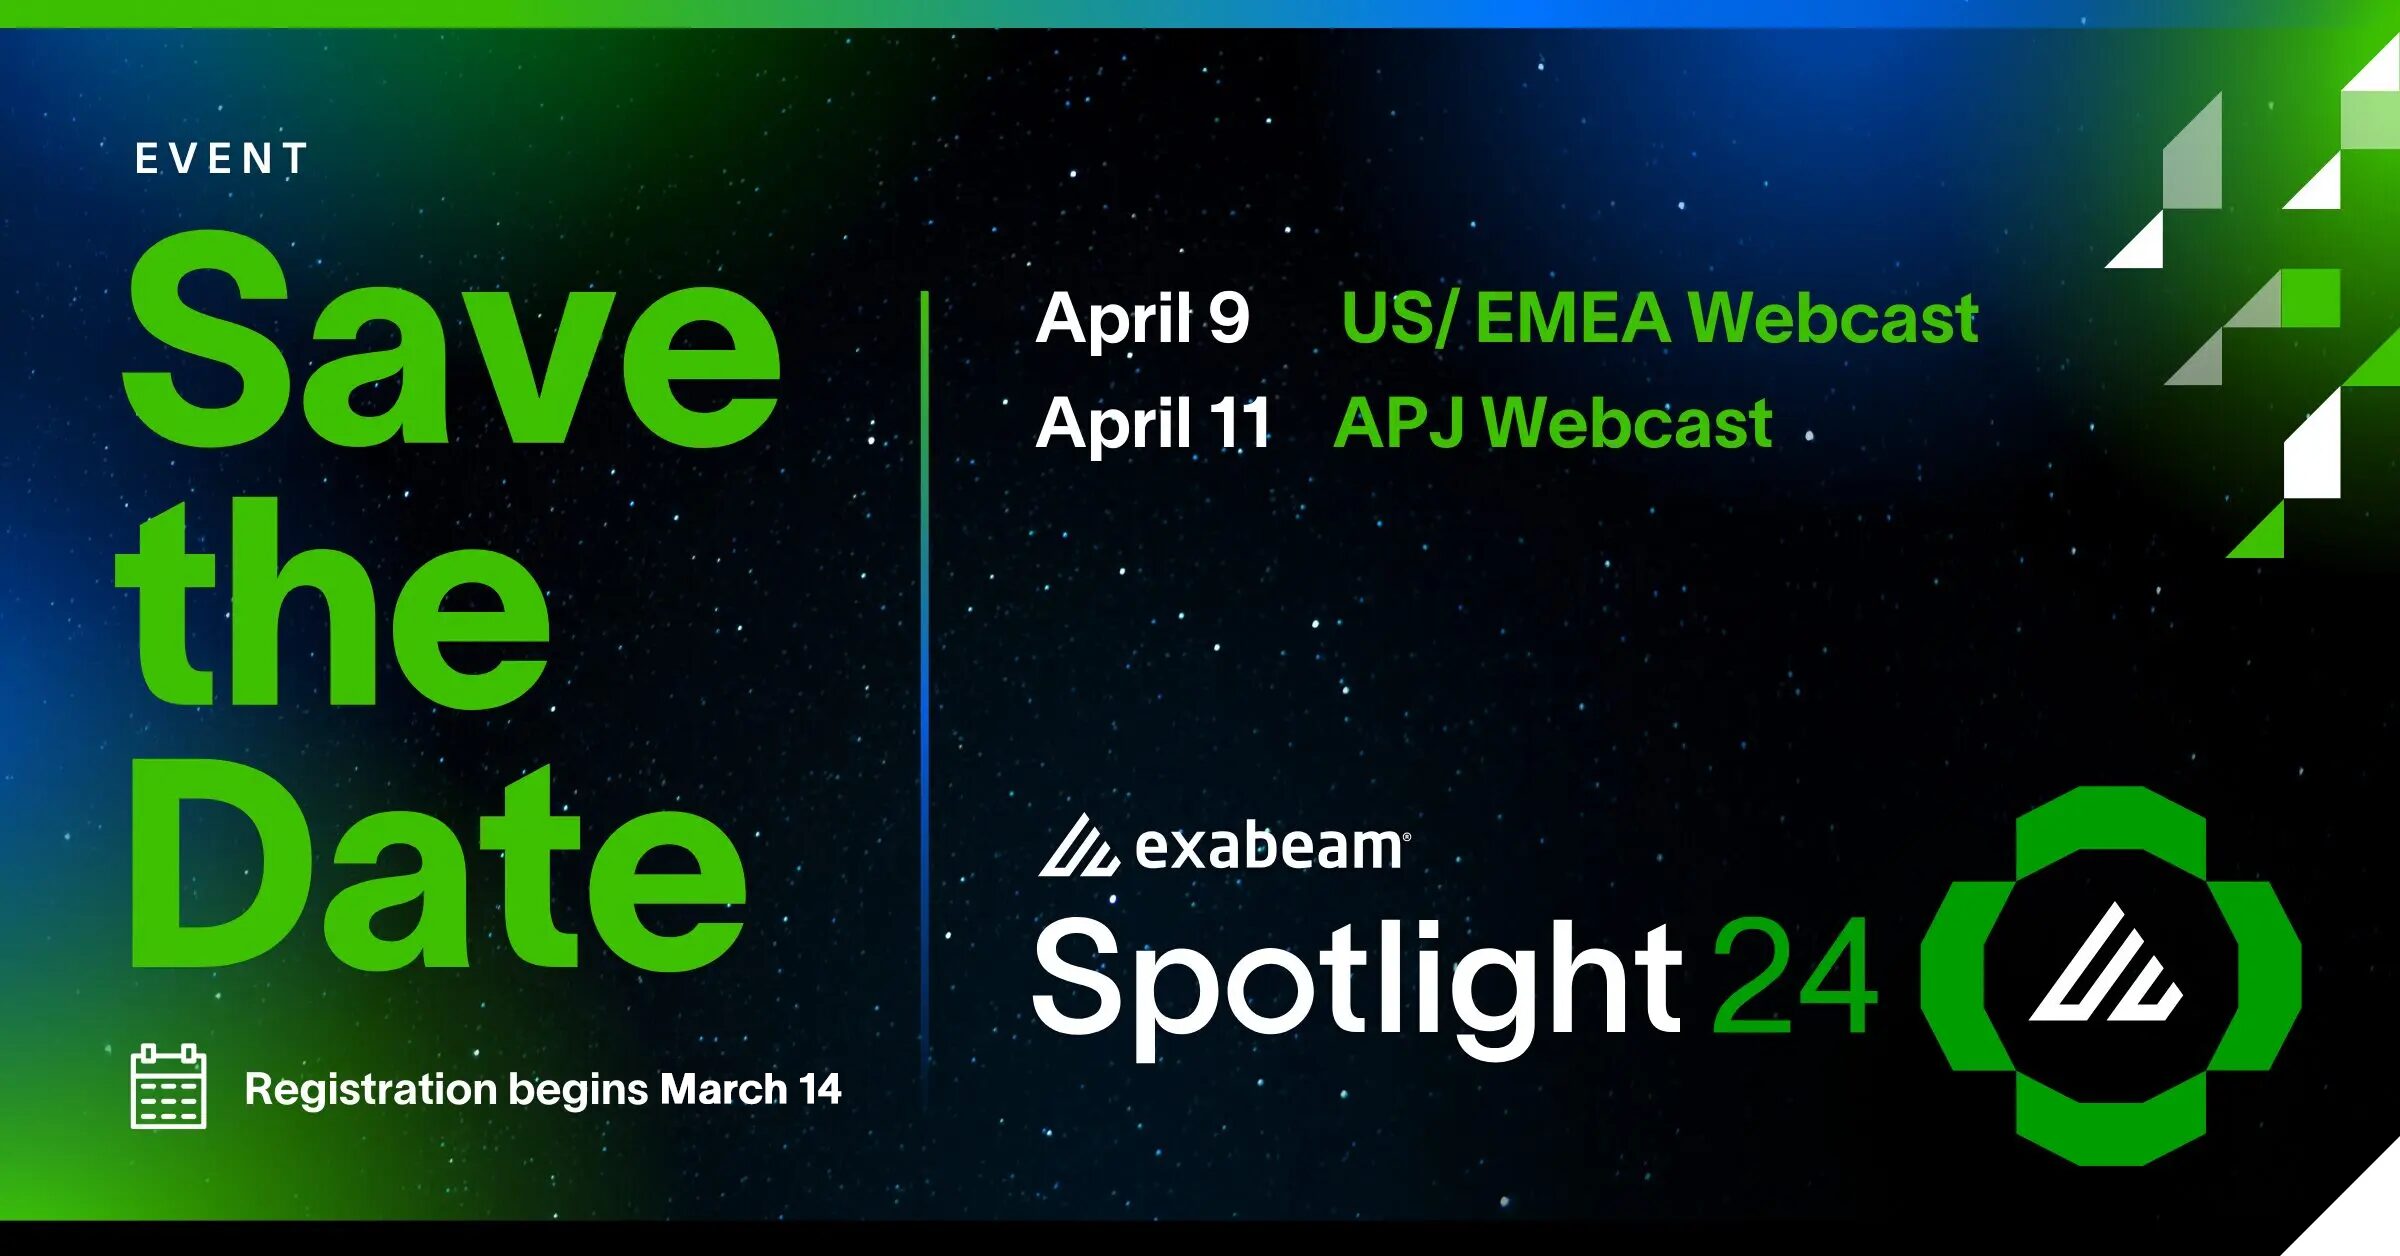 Save The Date! Exabeam Spotlight24 Global Webcast Registration Opens March 14